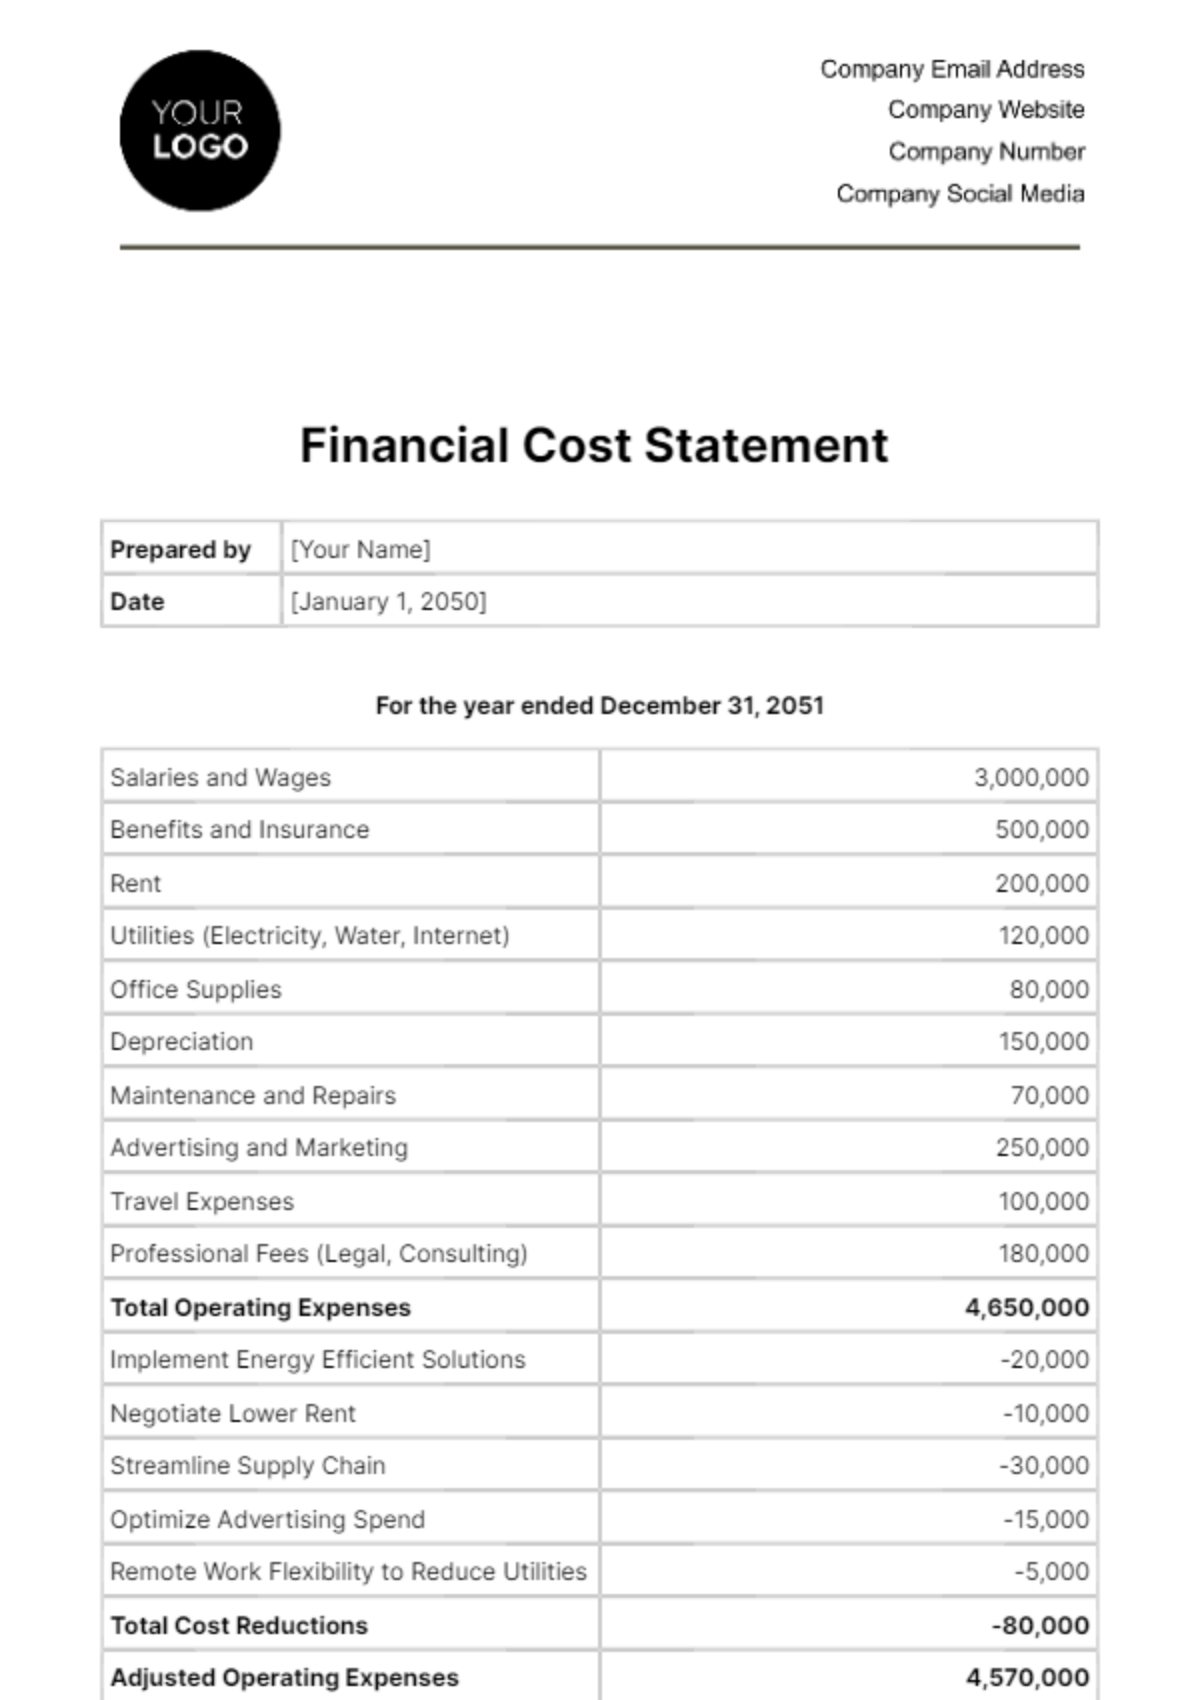 Financial Cost Statement Template